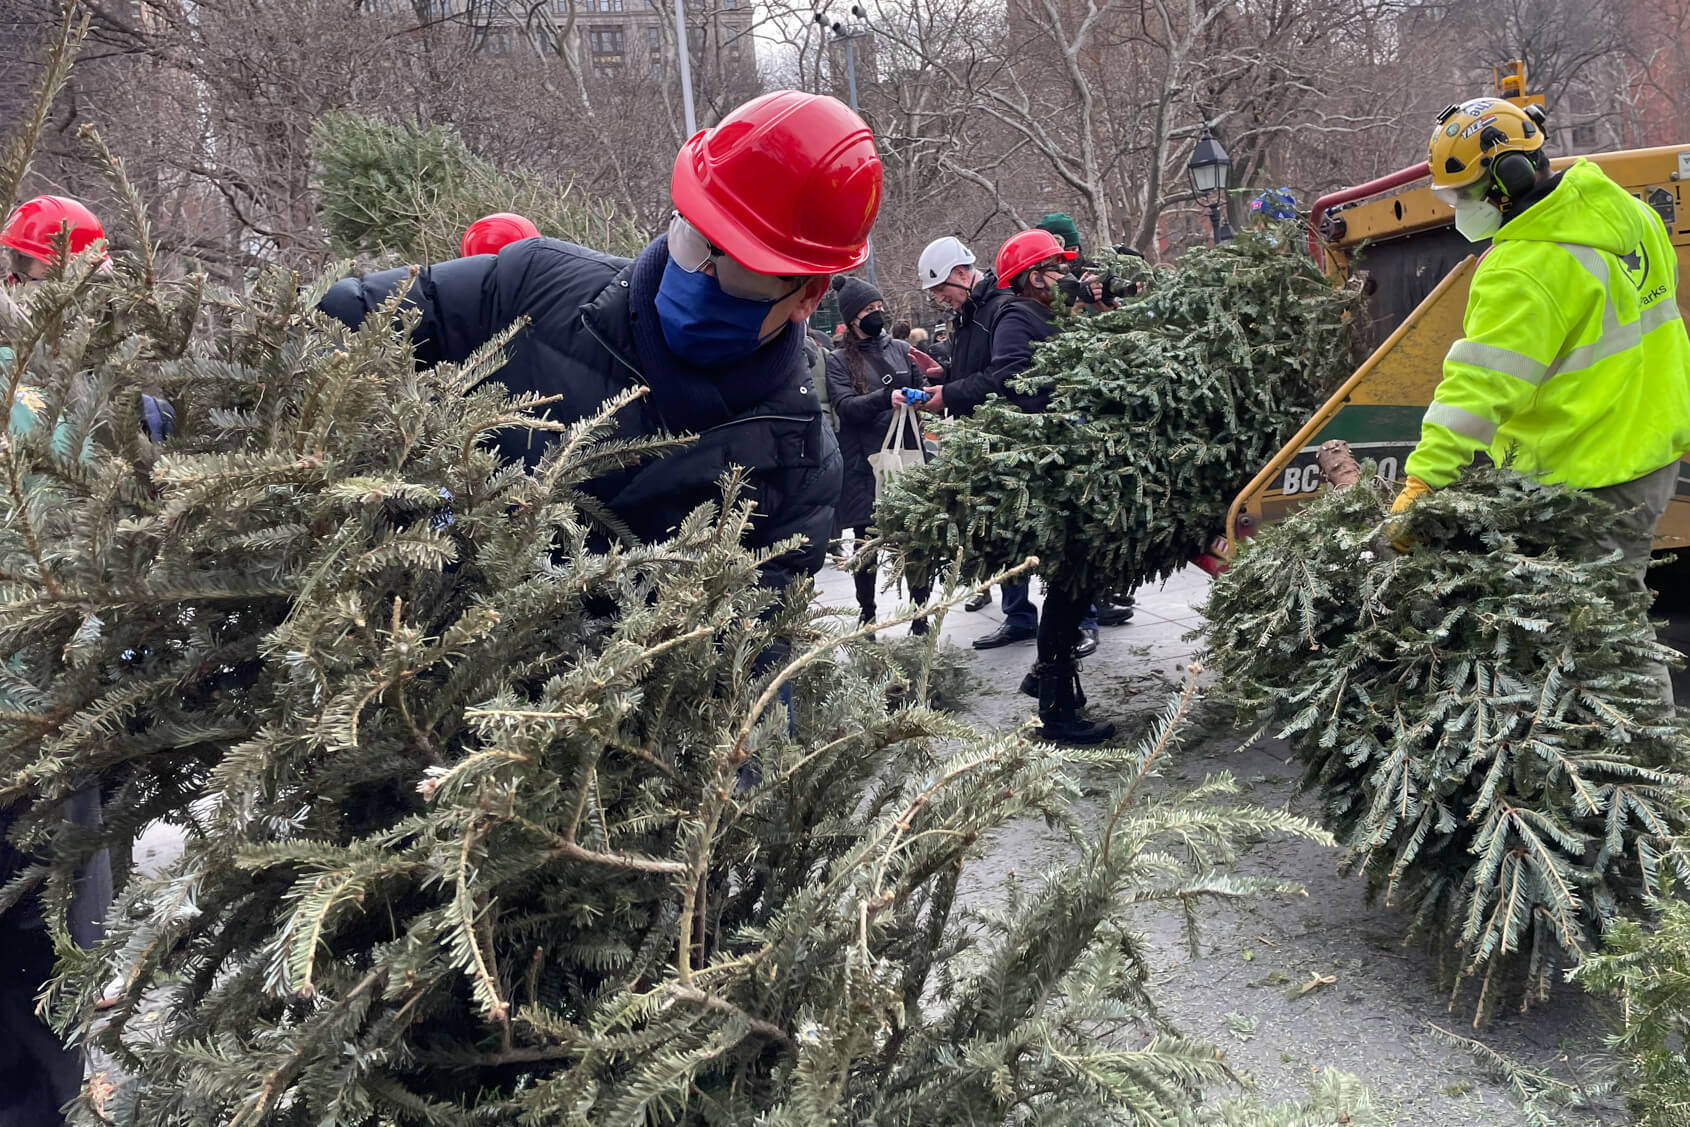 Recycling through Mulchfest, another purpose for holiday trees